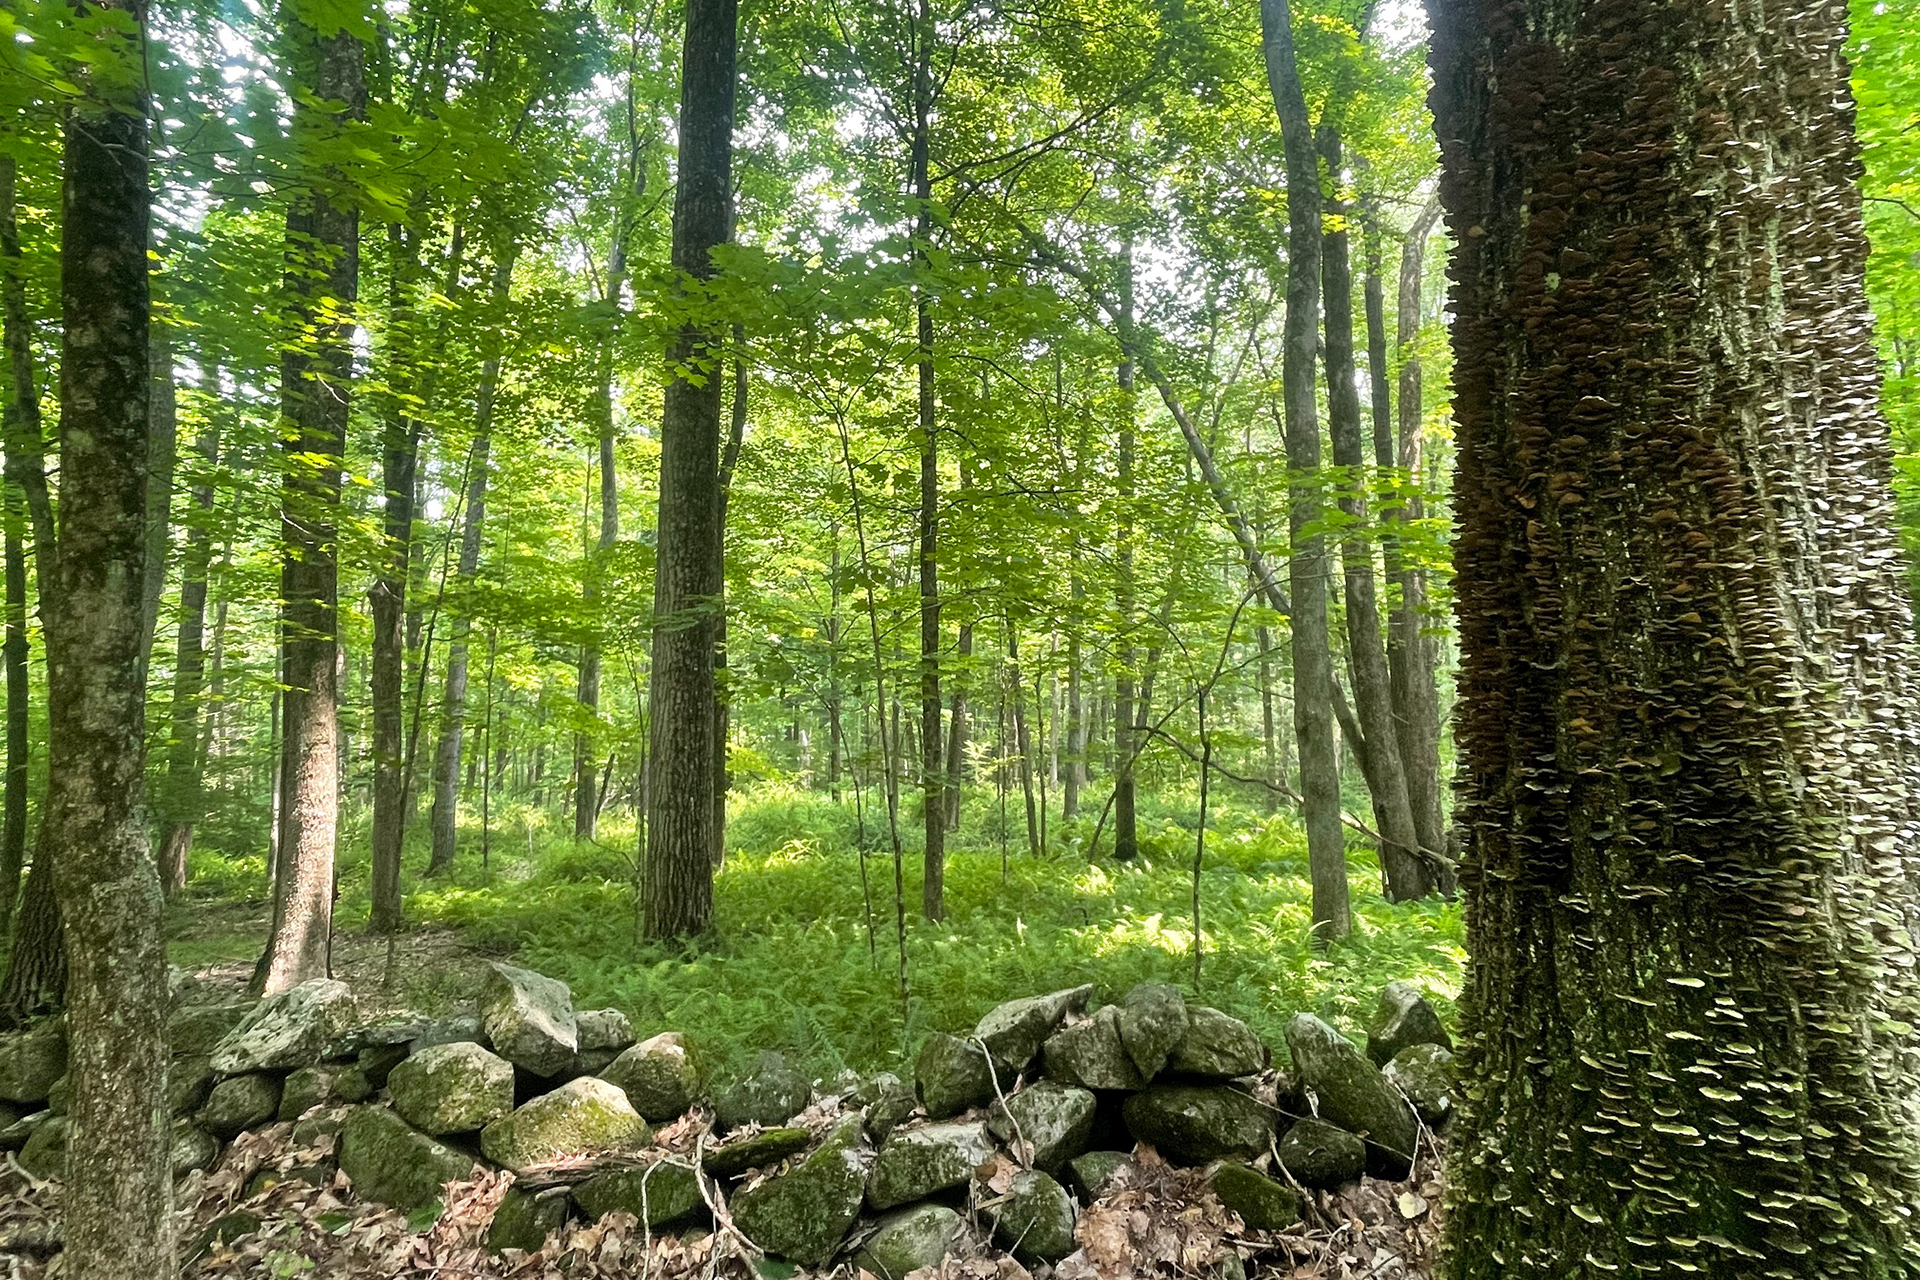 A stone wall and lush green forest at Laughing Brook